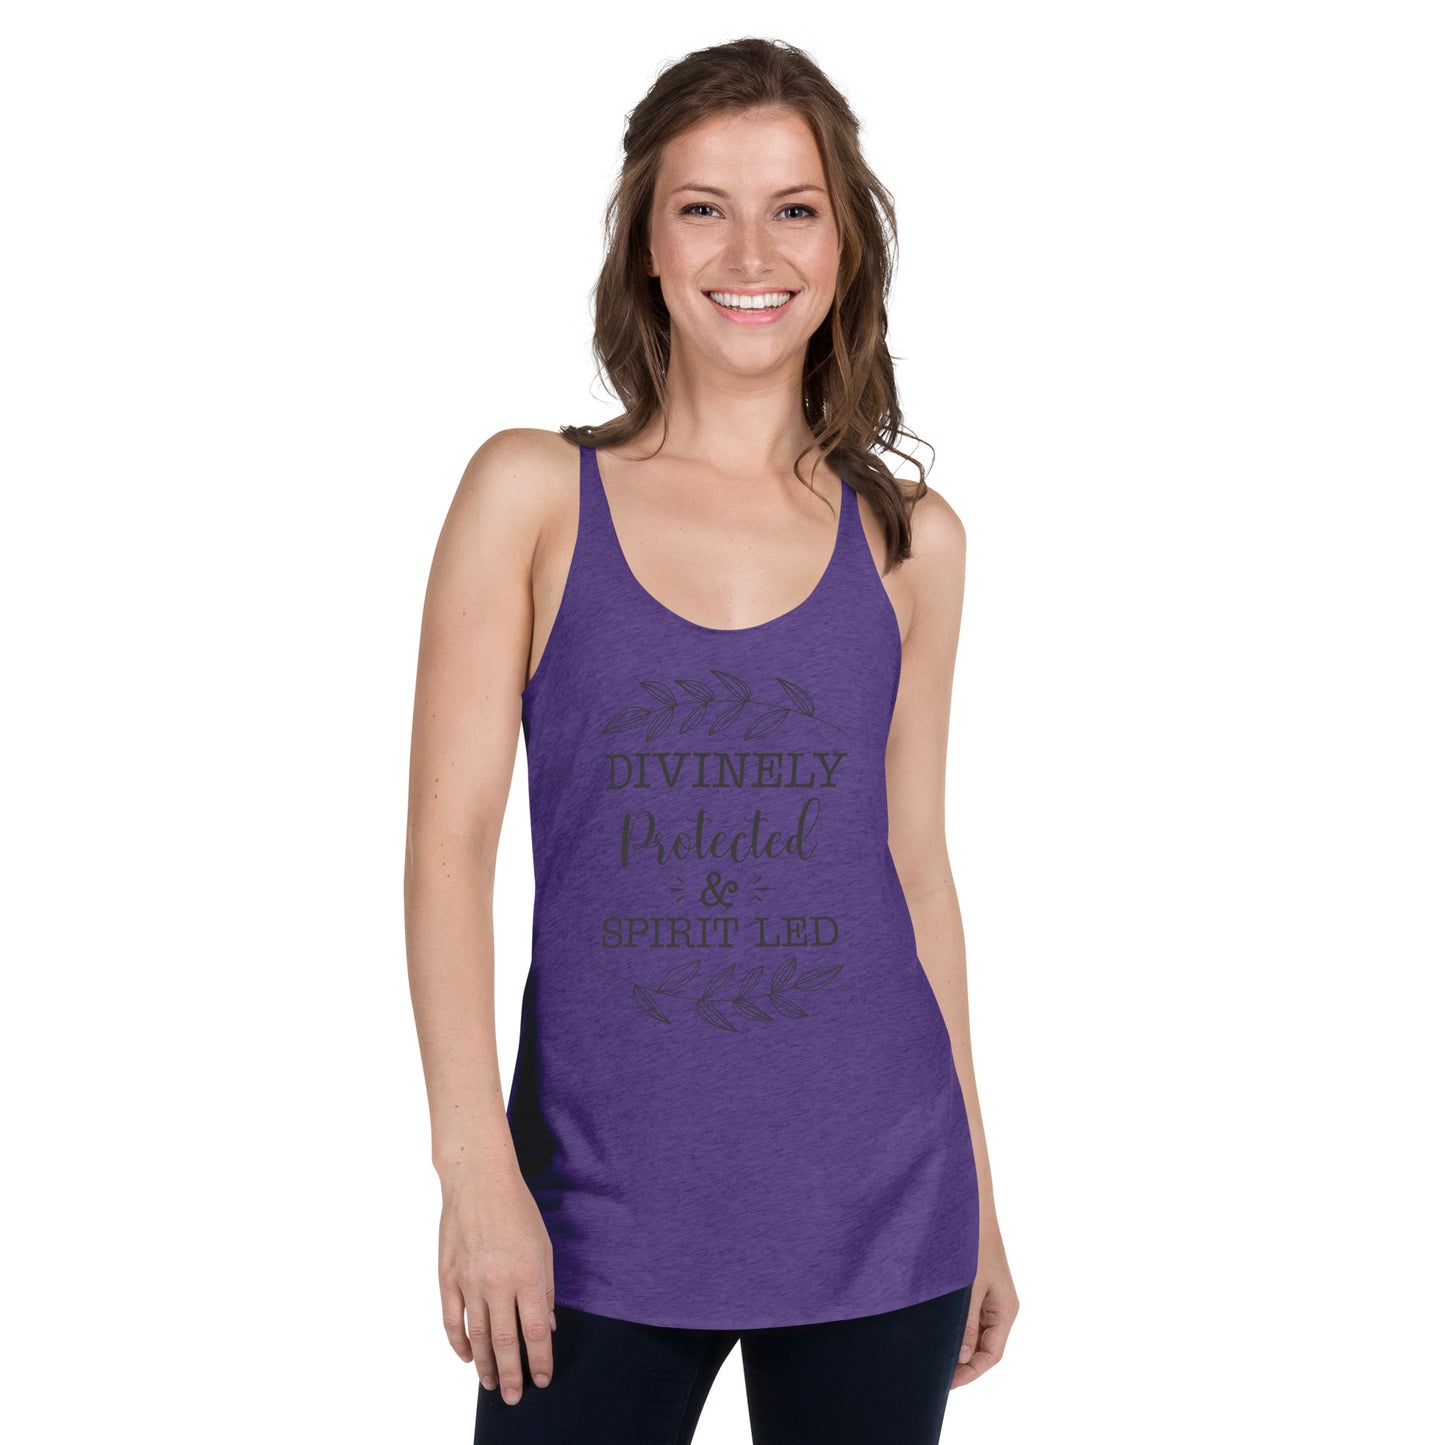 Divinely Protected Women's Racerback Tank